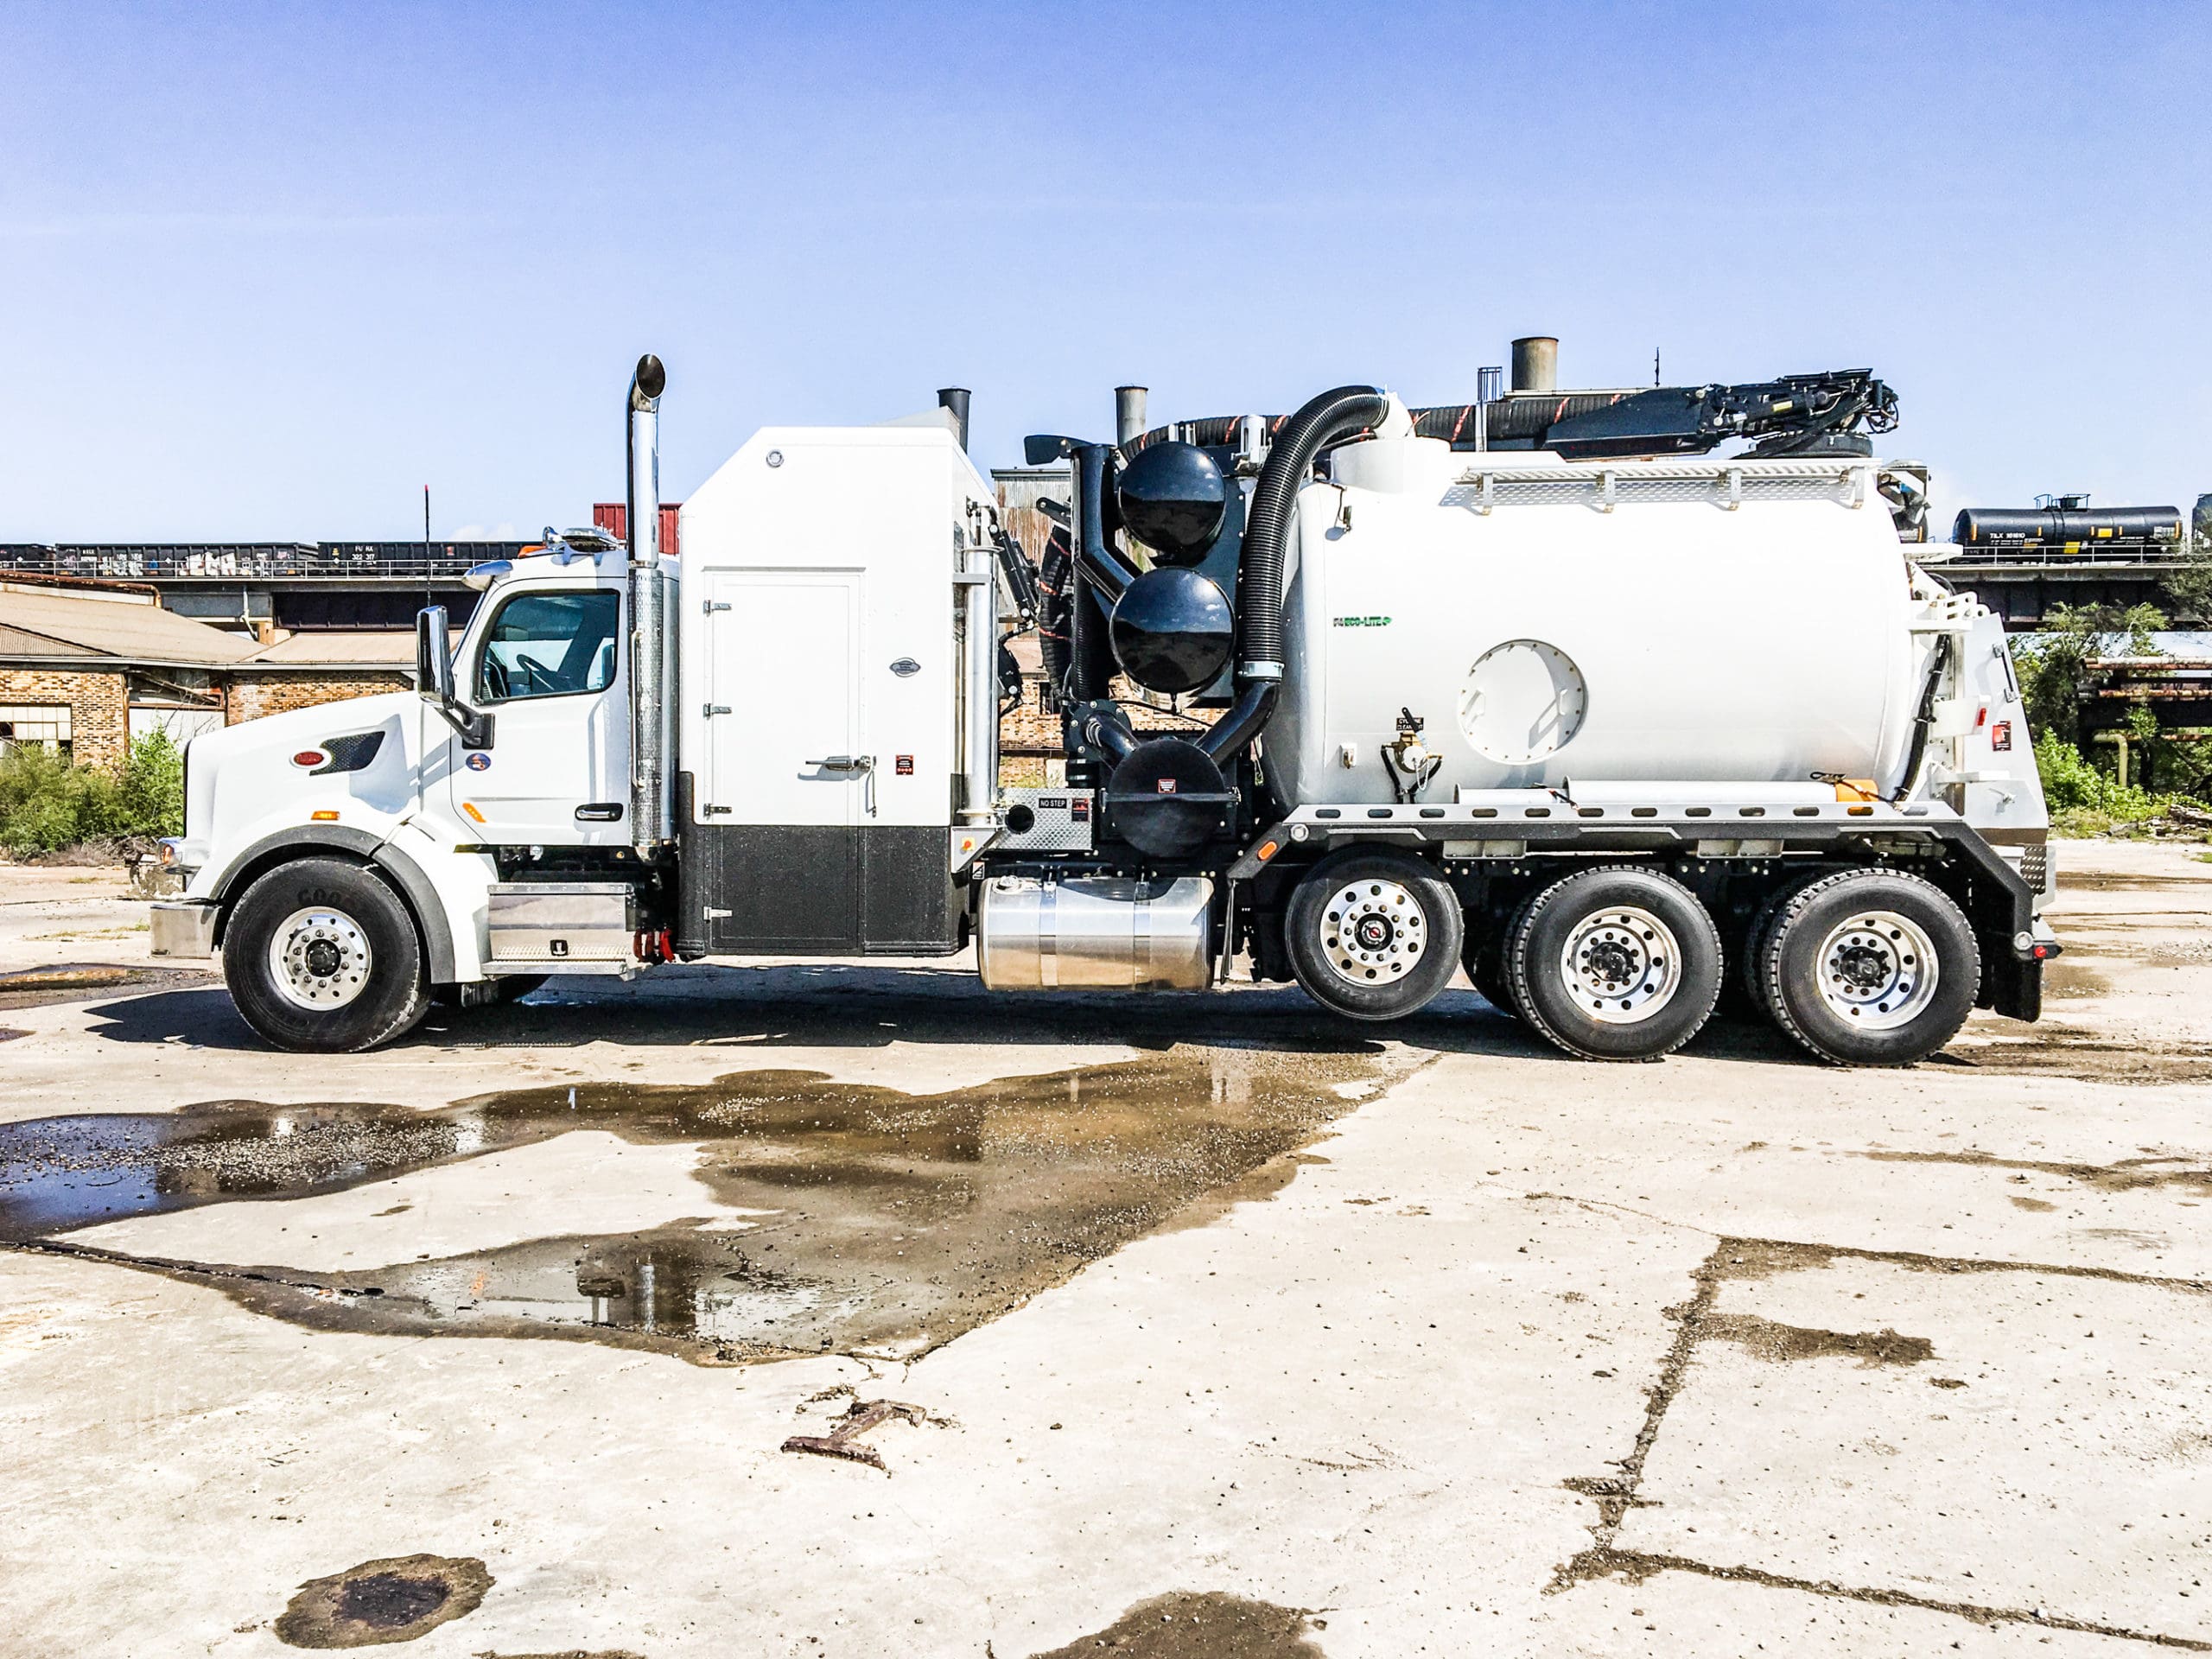 Tornado Global F4 EcoLite Hydrovac truck with a positive displacement blower mounted on a Peterbilt 567 chassis